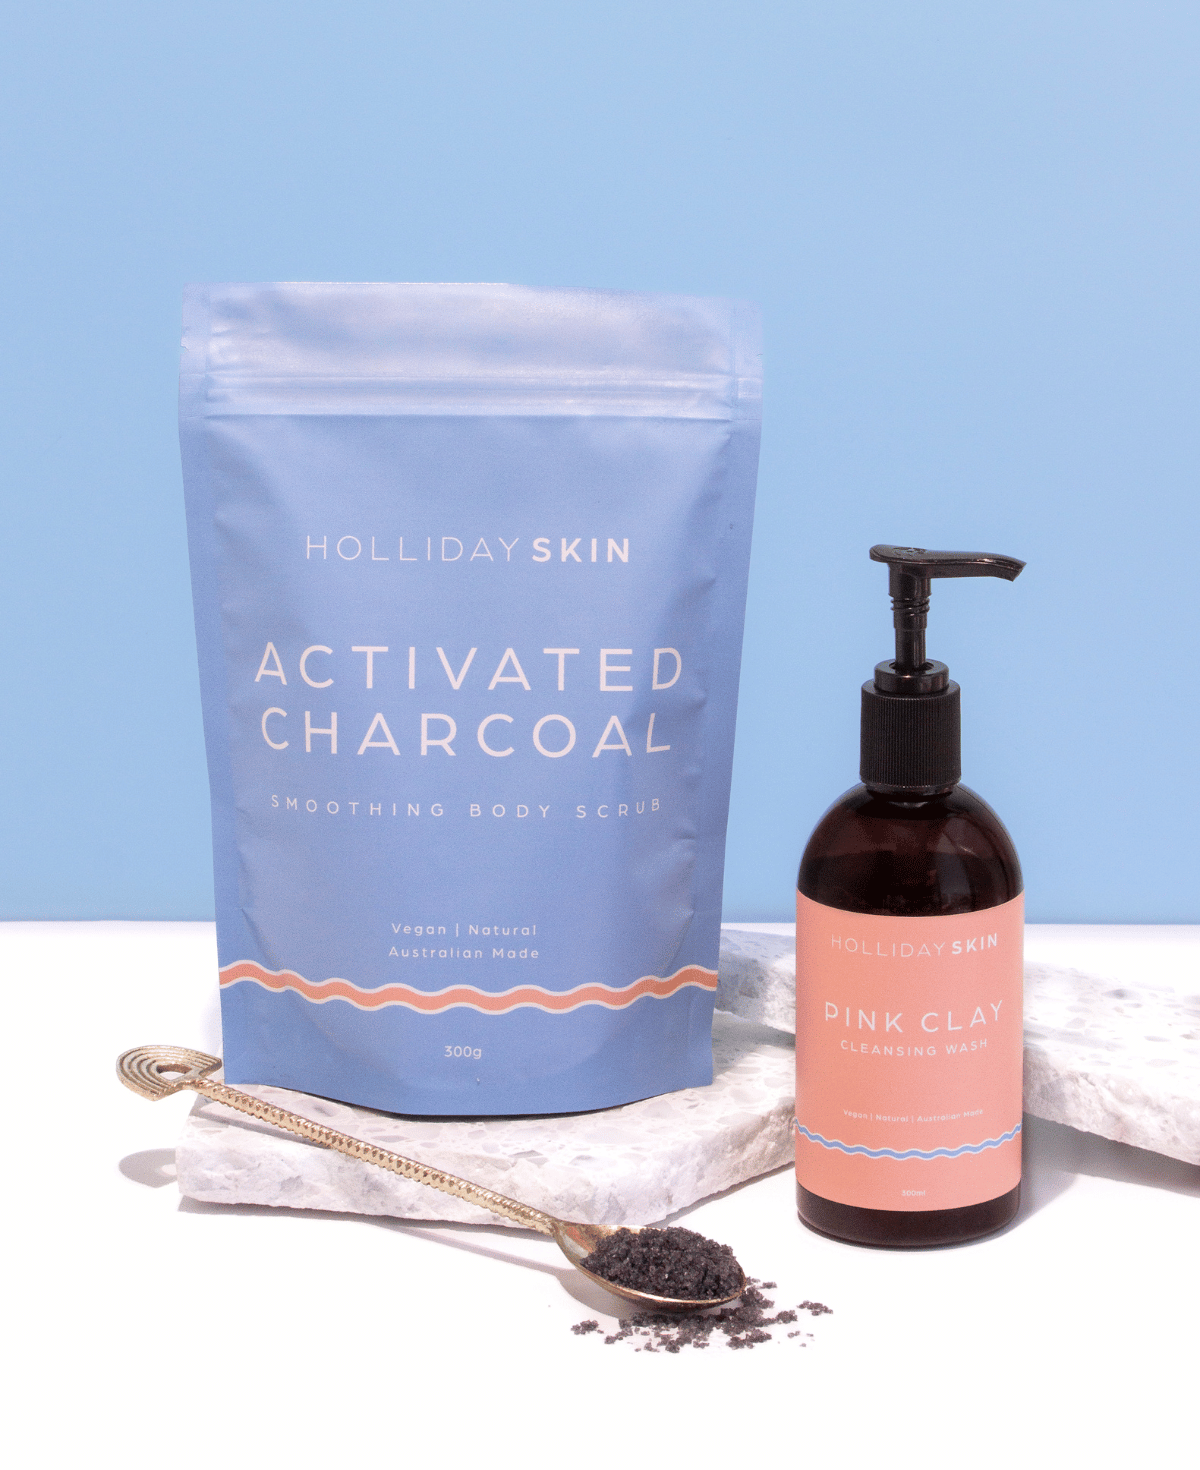 Clear skin with Activated Charcoal and Australian Pink Clay